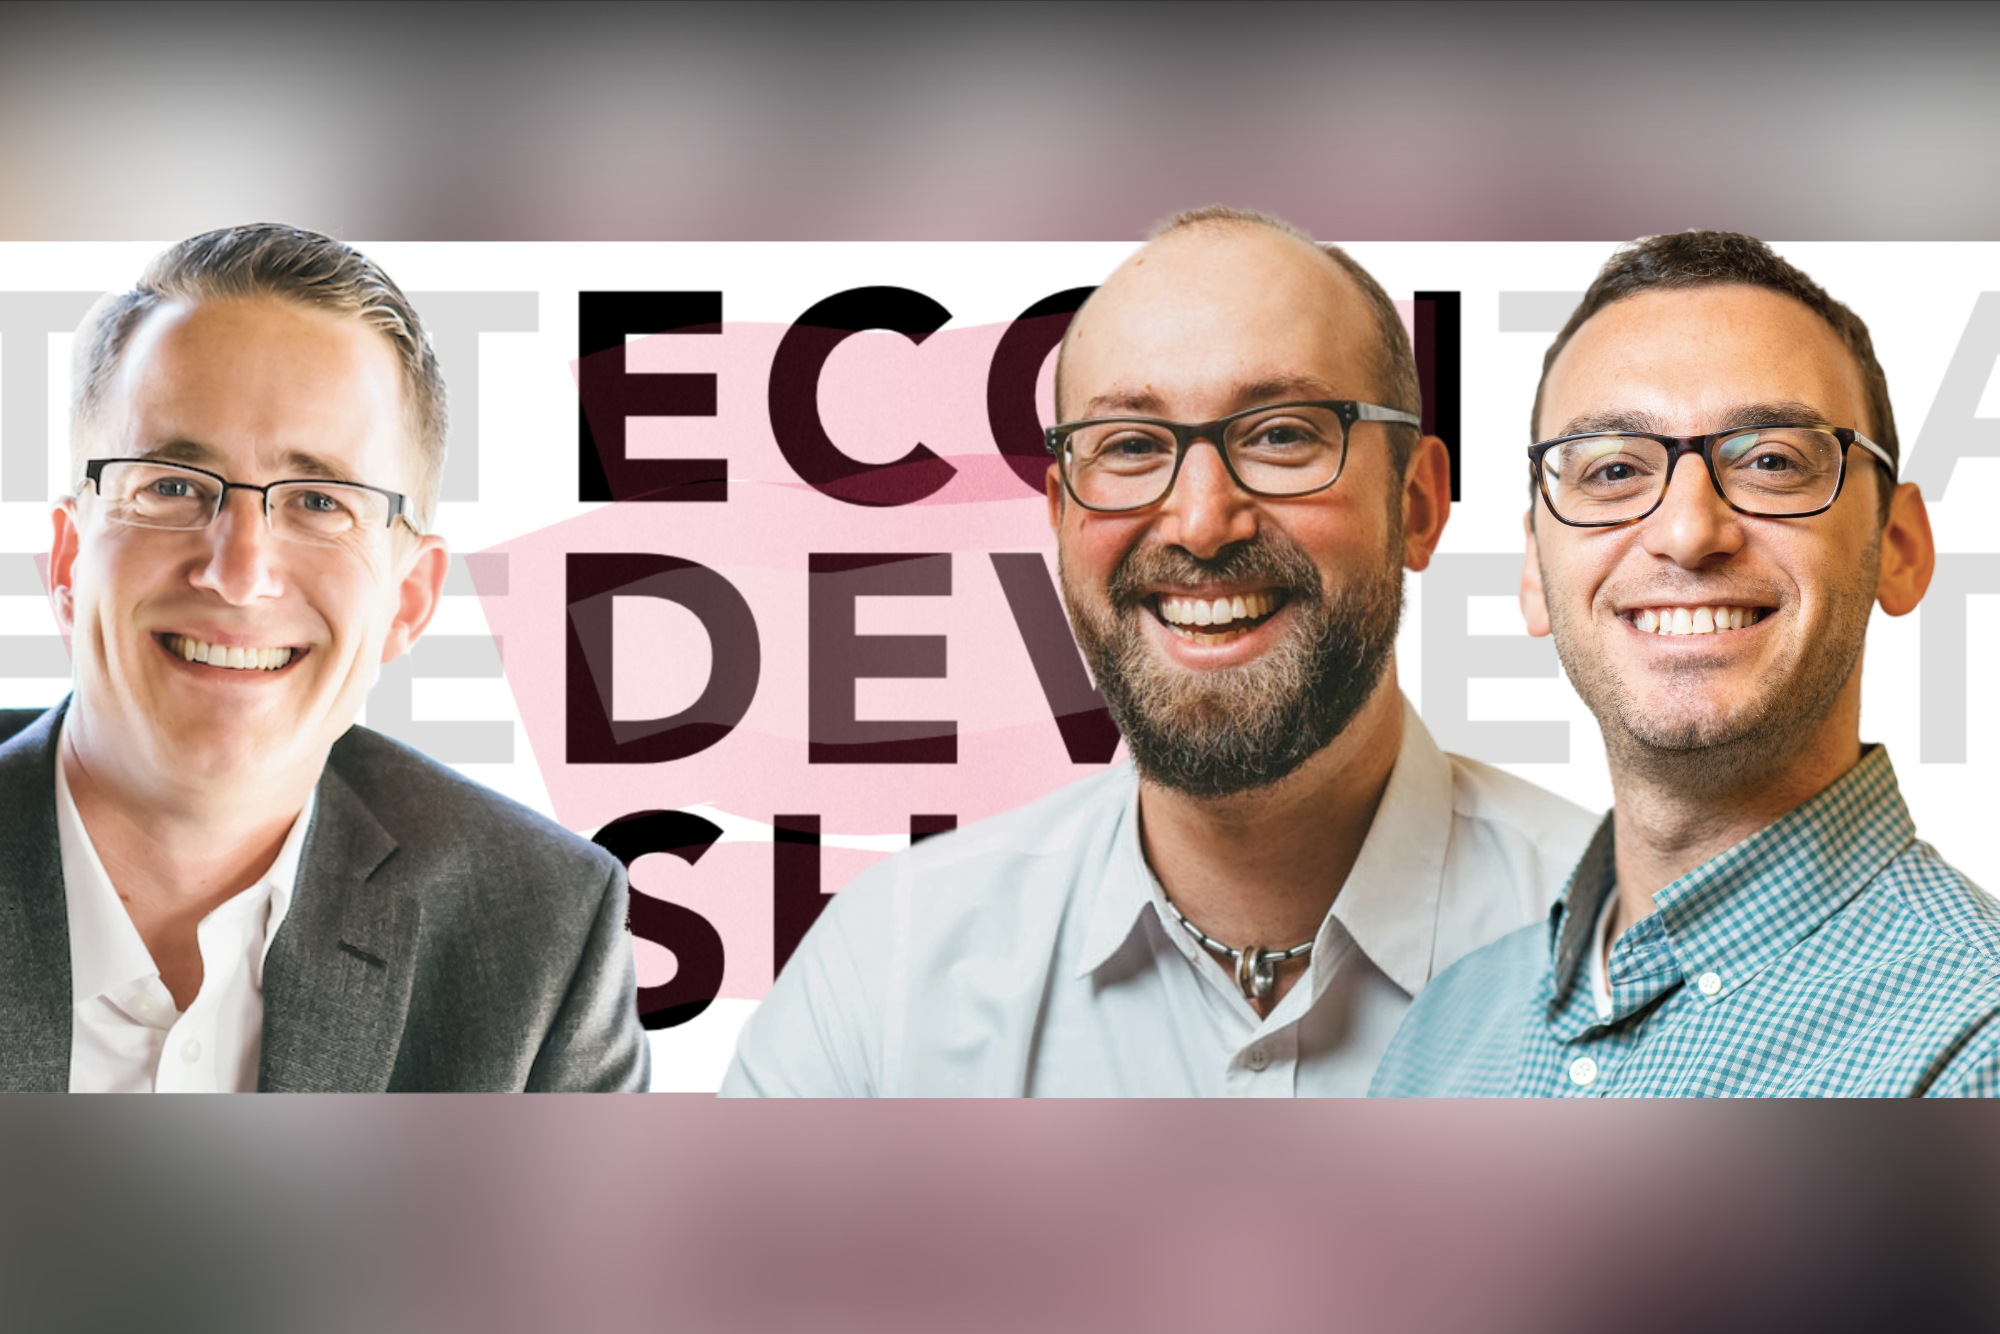 Podcast # 111 - The Great Outdoors as an Economic Engine with Noah Wilson and Bradley Spiegel